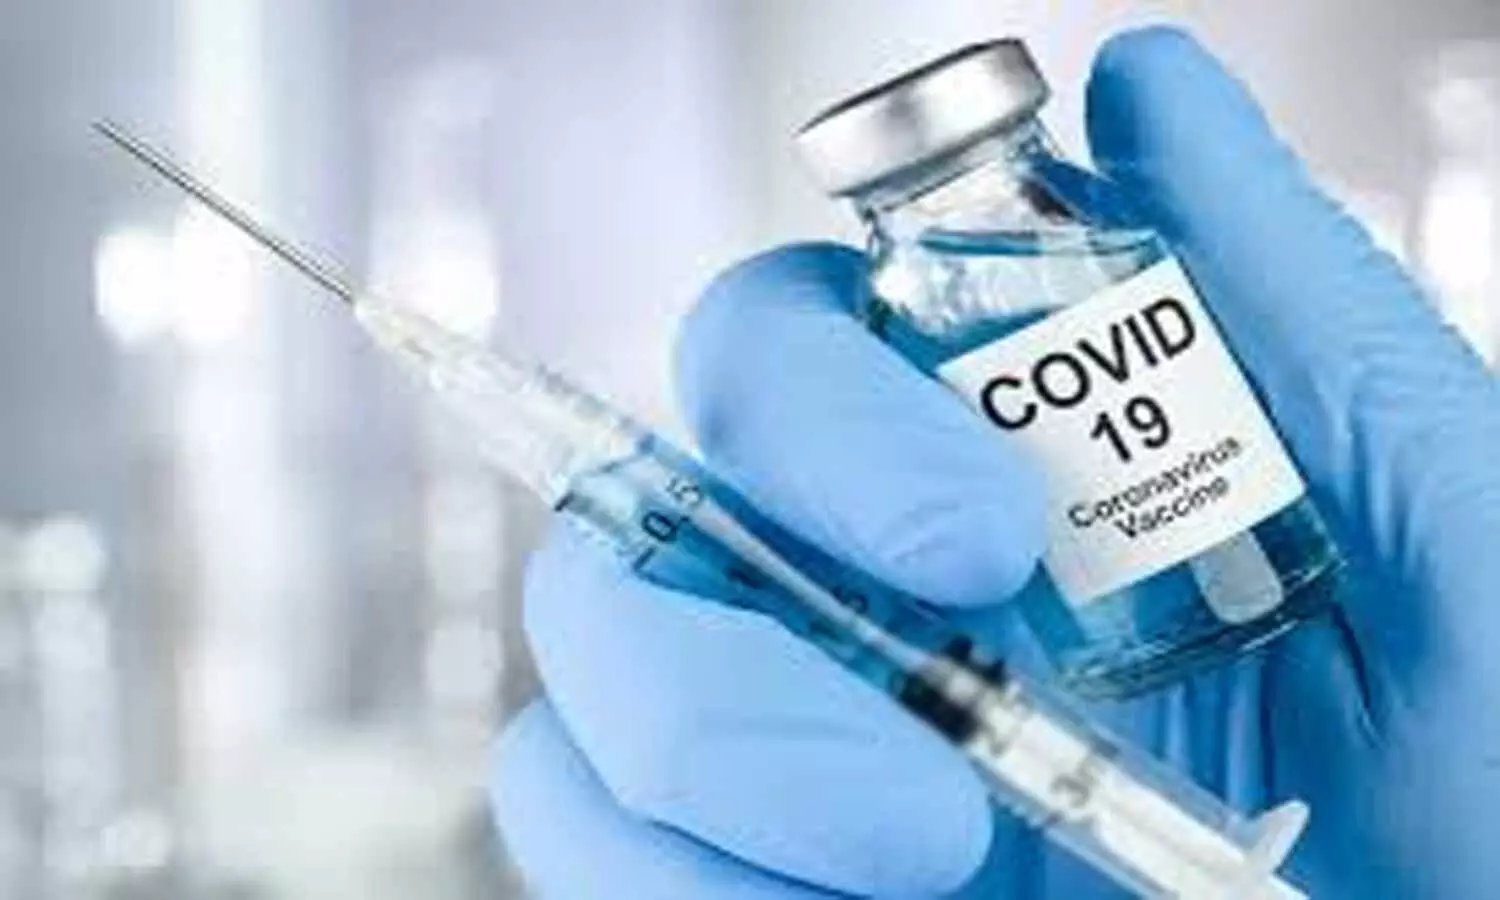 Oxford COVID-19 vaccine safe and effective: phase 3 trials results first published in LANCET